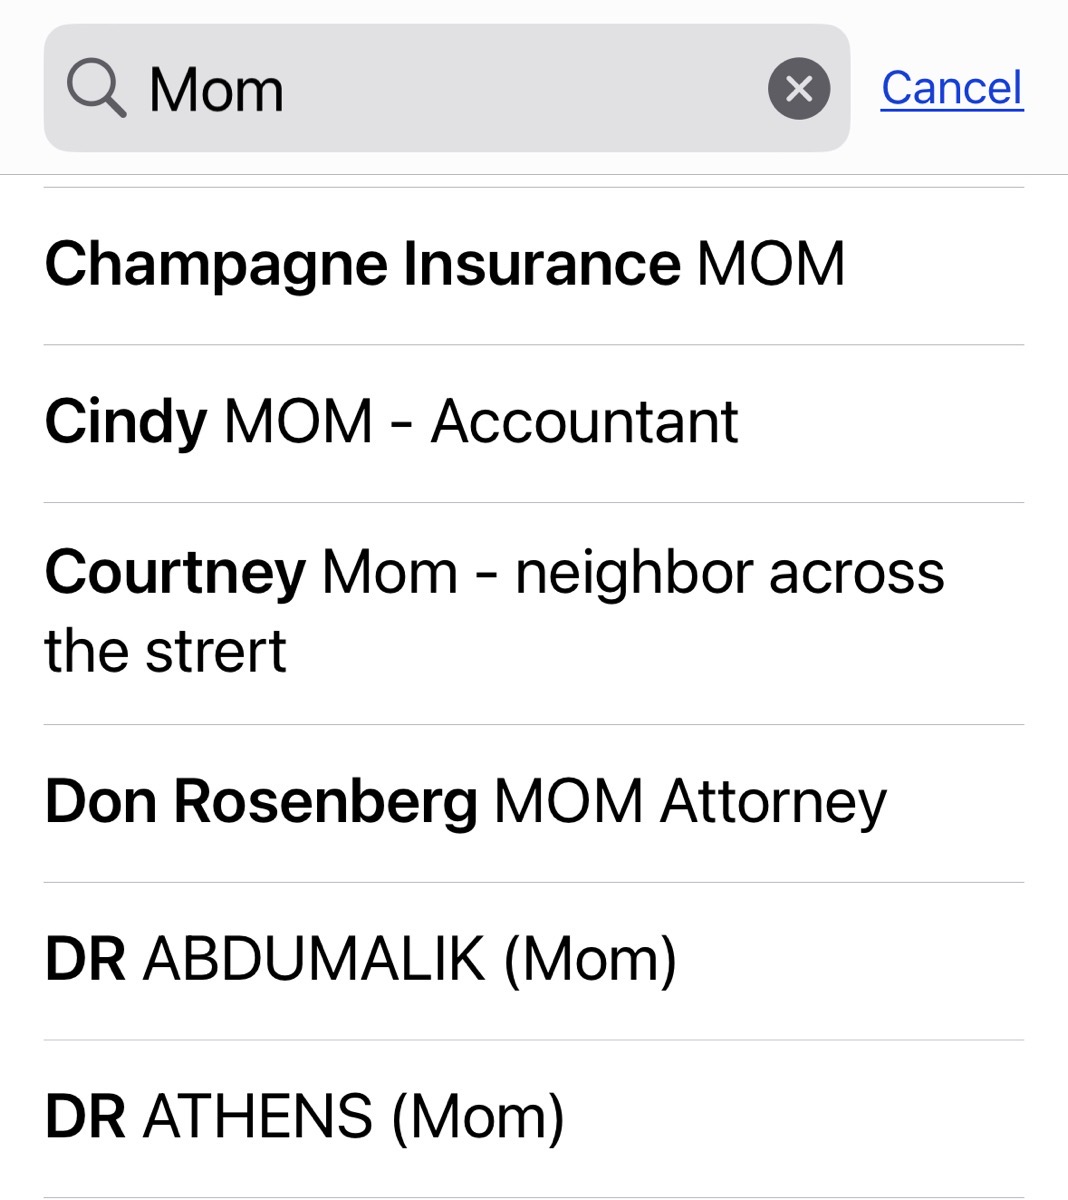 Searching for Mom reveals all of her contacts